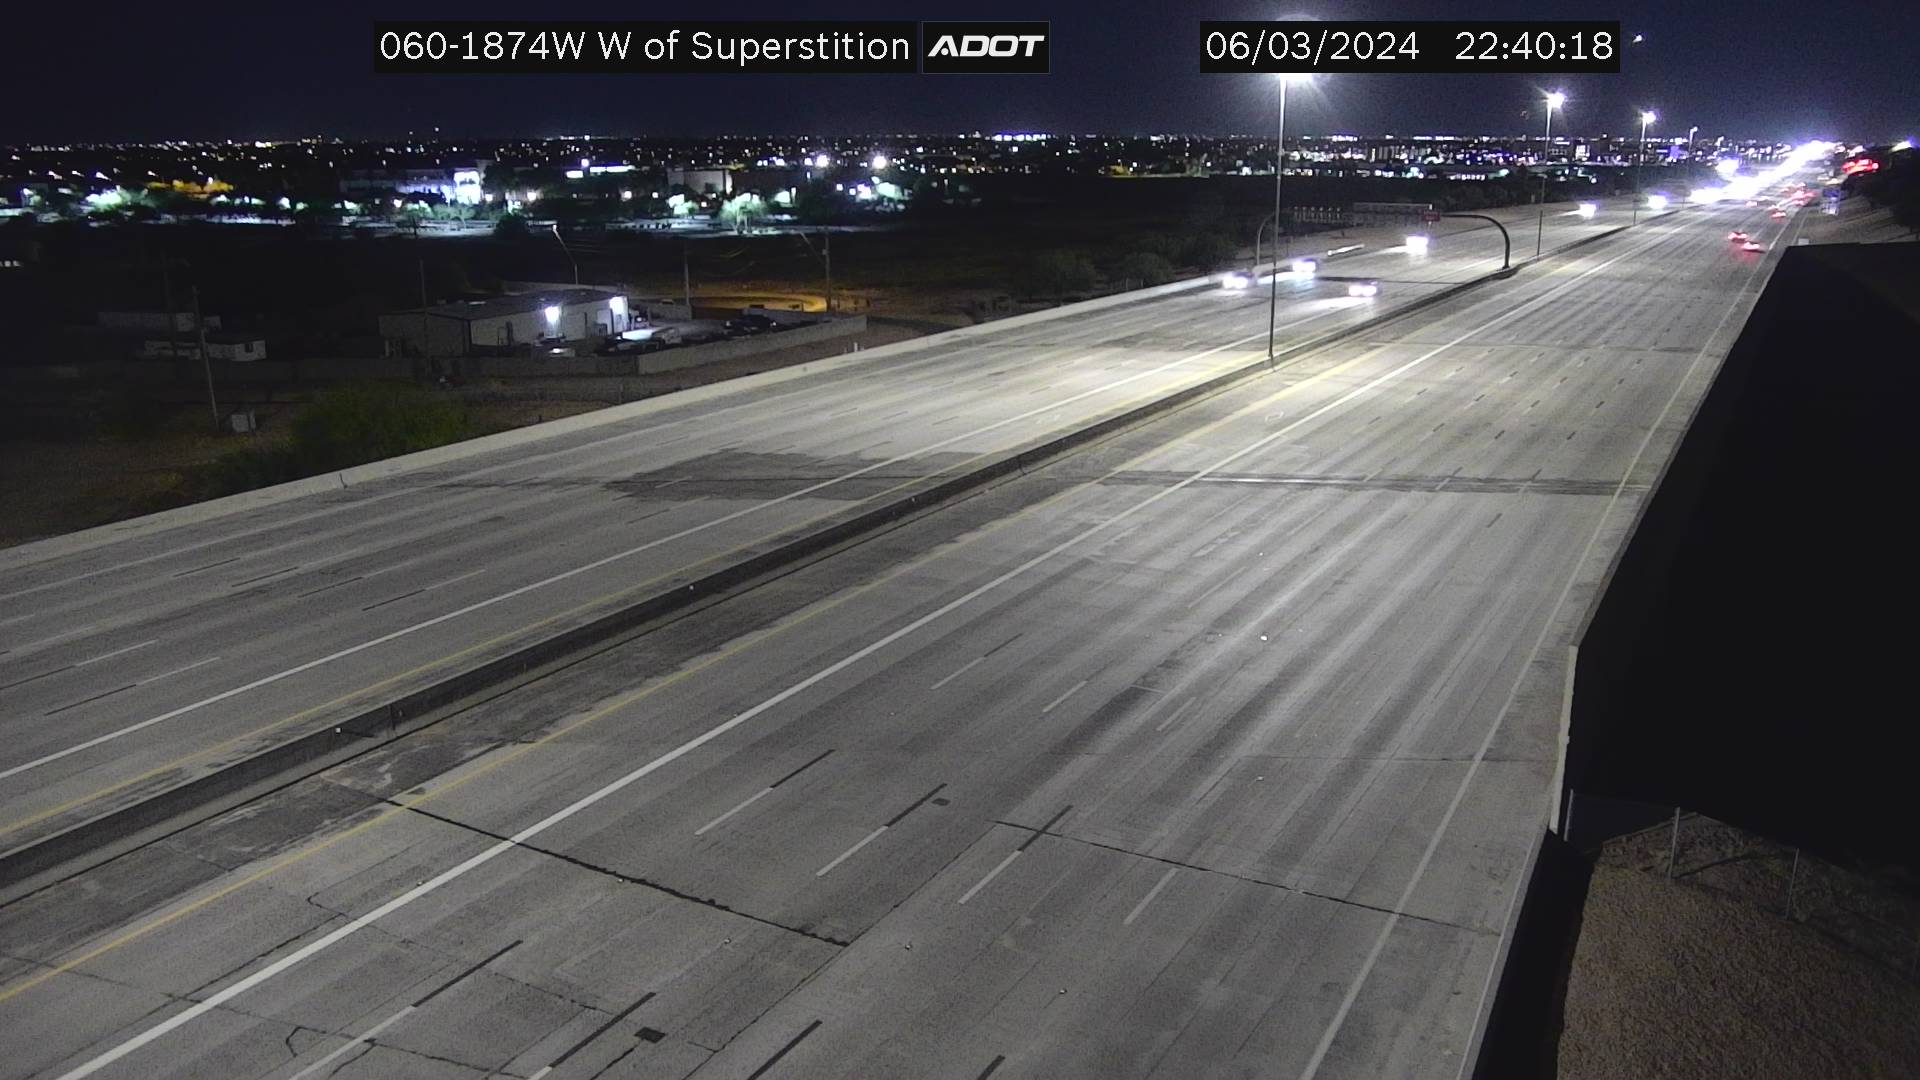 Traffic Cam US-60 WB 187.49 @W of Superstition 